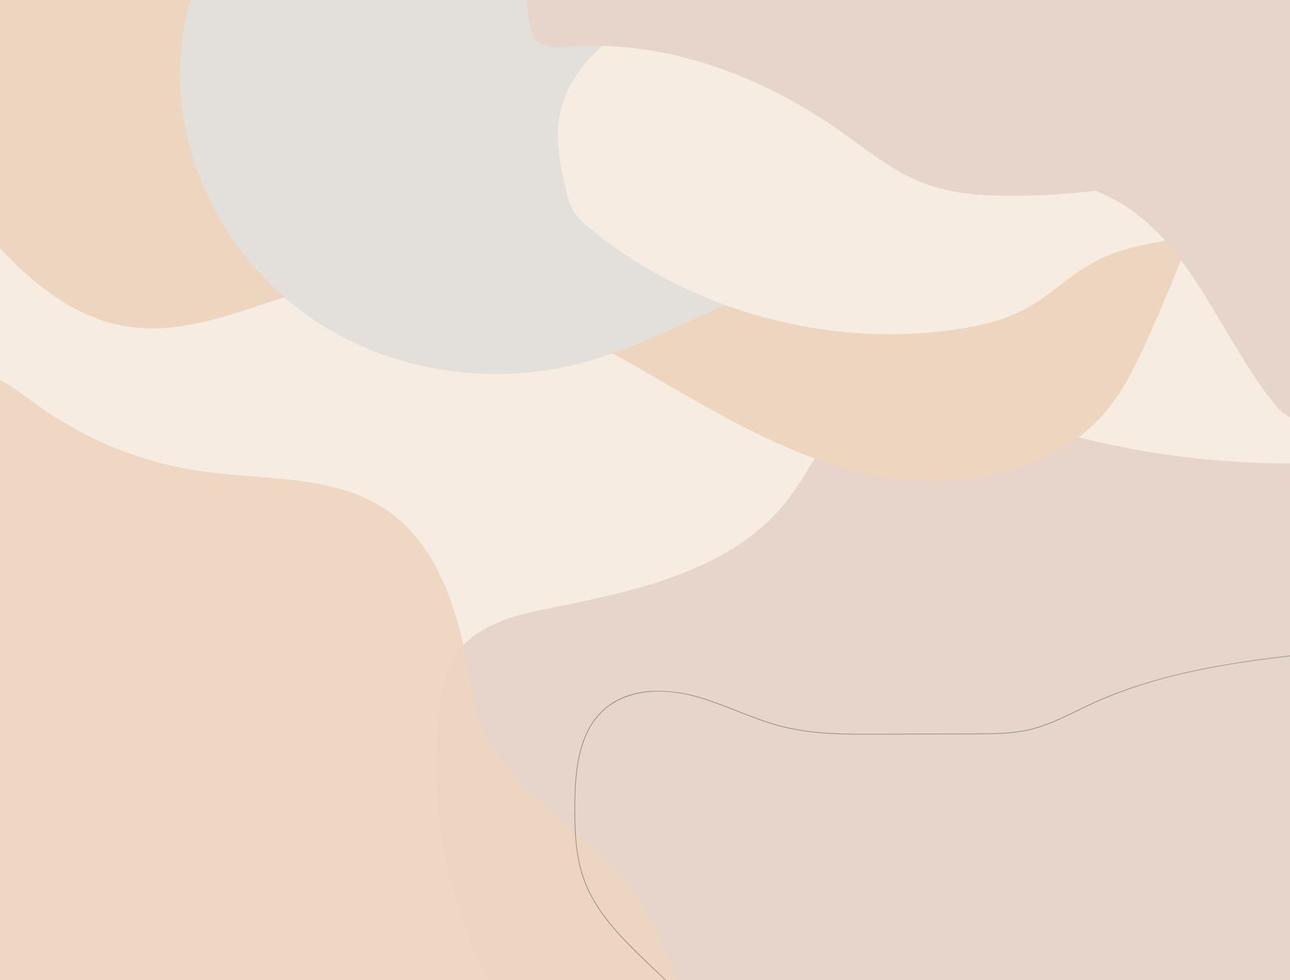 Pastel colored stylish shapes templates with abstract curves and lines stoke for pastel colorful templates, Neutral background in minimalist style, vector and Illustration